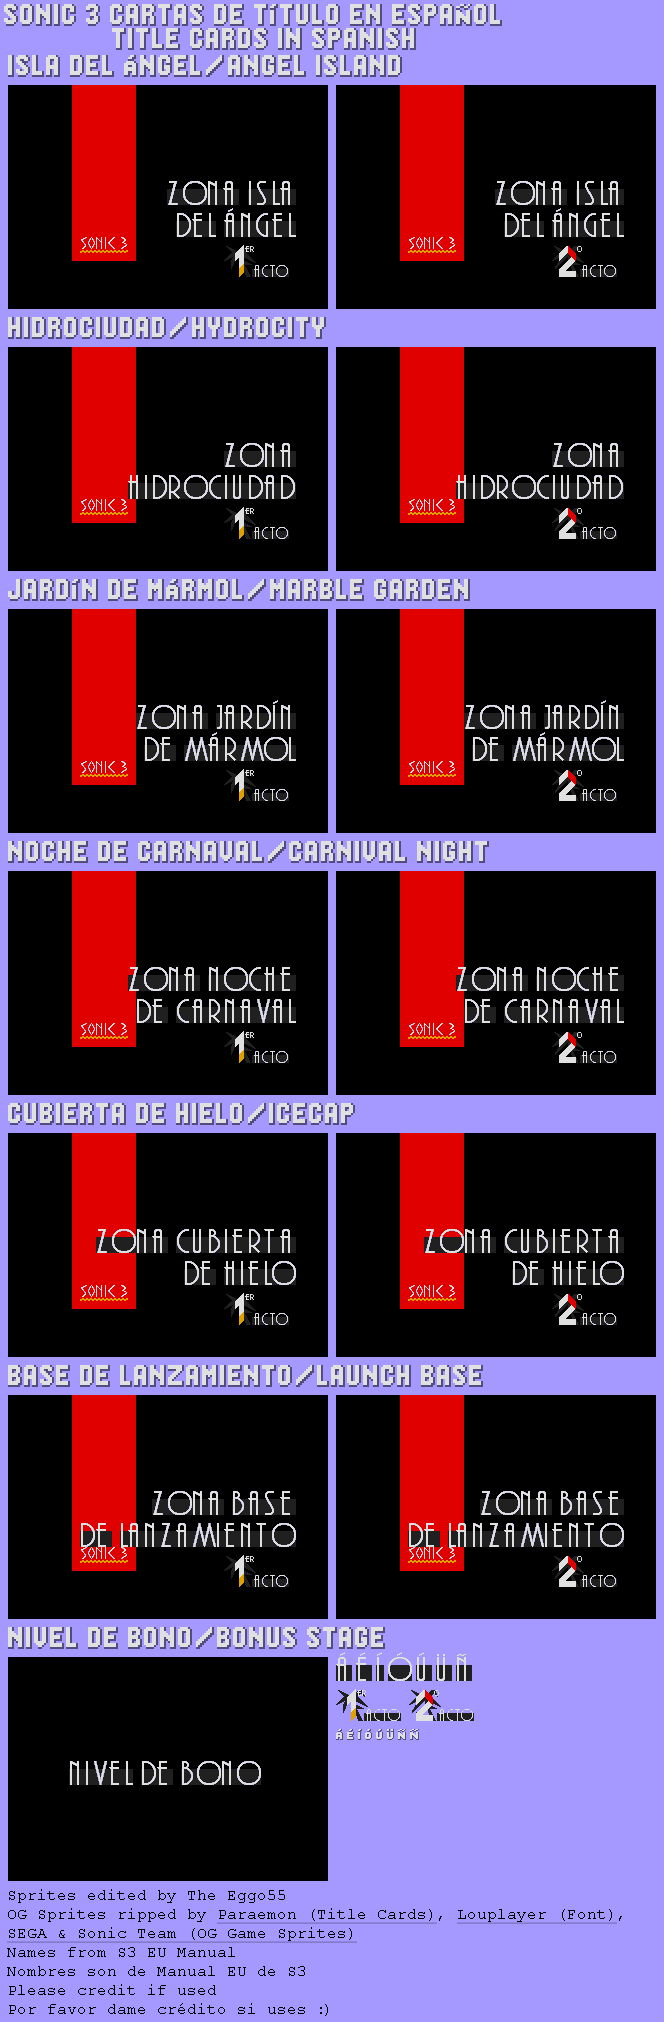 Sonic 3 Title Cards (Spanish)